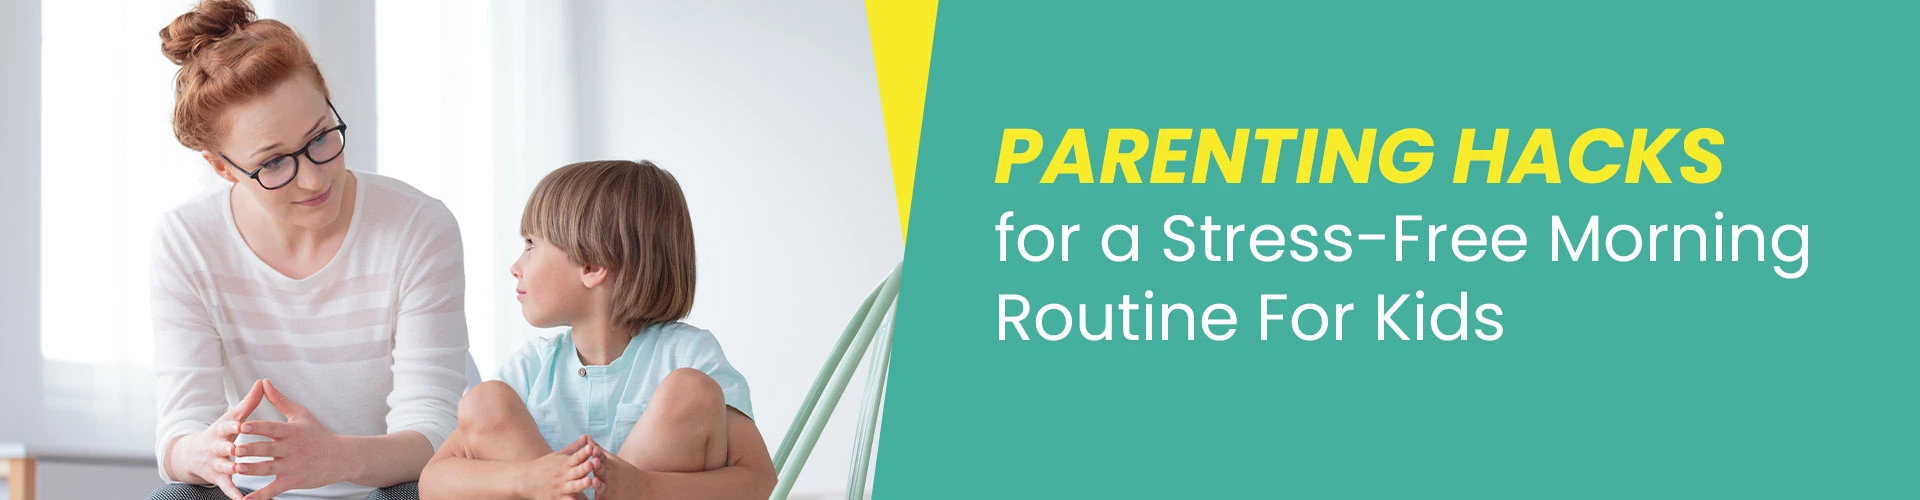 Parenting Hacks For a Stress Free Morning Routine For Kids 2